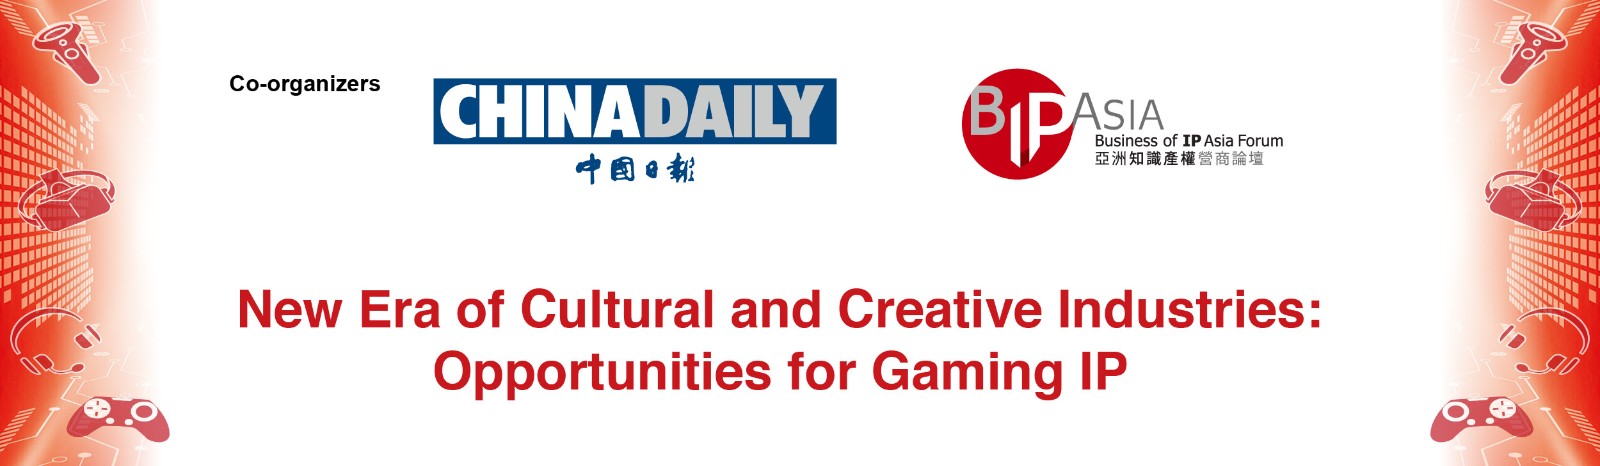 New Era of Cultural and Creative Industries: Opportunities for Gaming IP